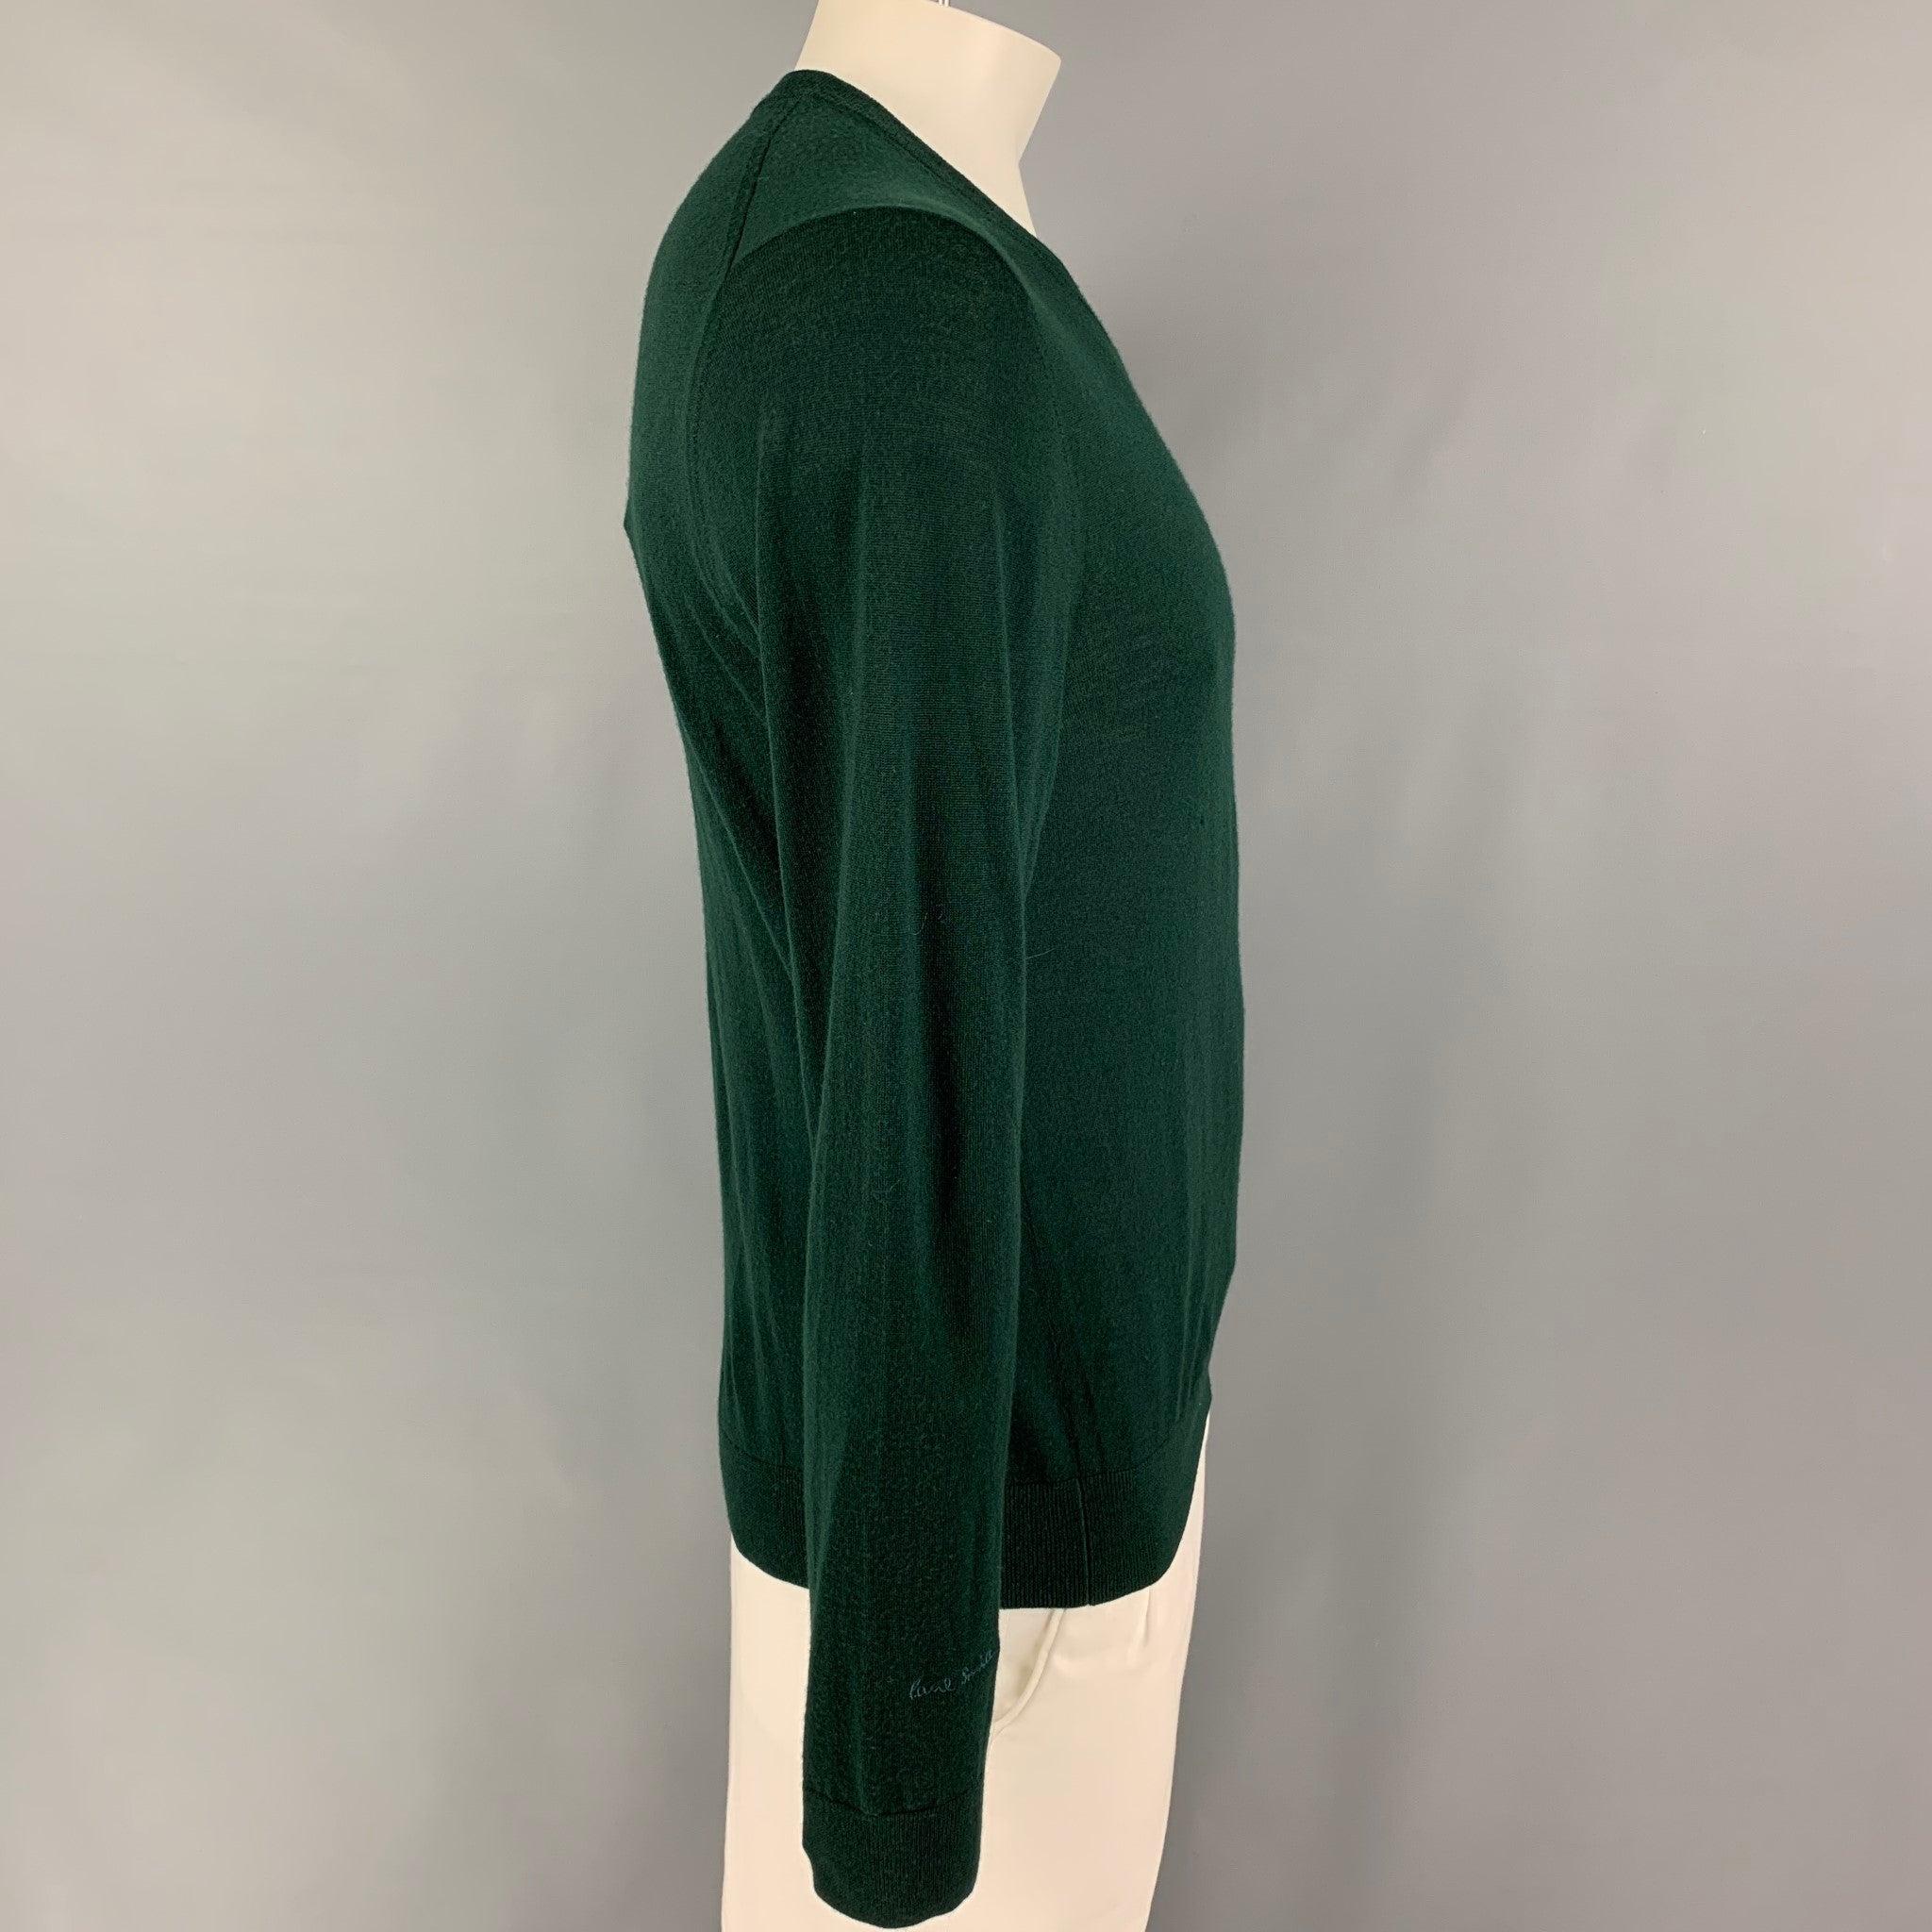 PAUL SMITH pullover comes in a forest green merino wool featuring a crew-neck.
Very Good
Pre-Owned Condition. 

Marked:   L  

Measurements: 
 
Shoulder:
18 inches Chest:
40 inches Sleeve: 27 inches Length: 25.5 inches 
  
  
 
Reference: